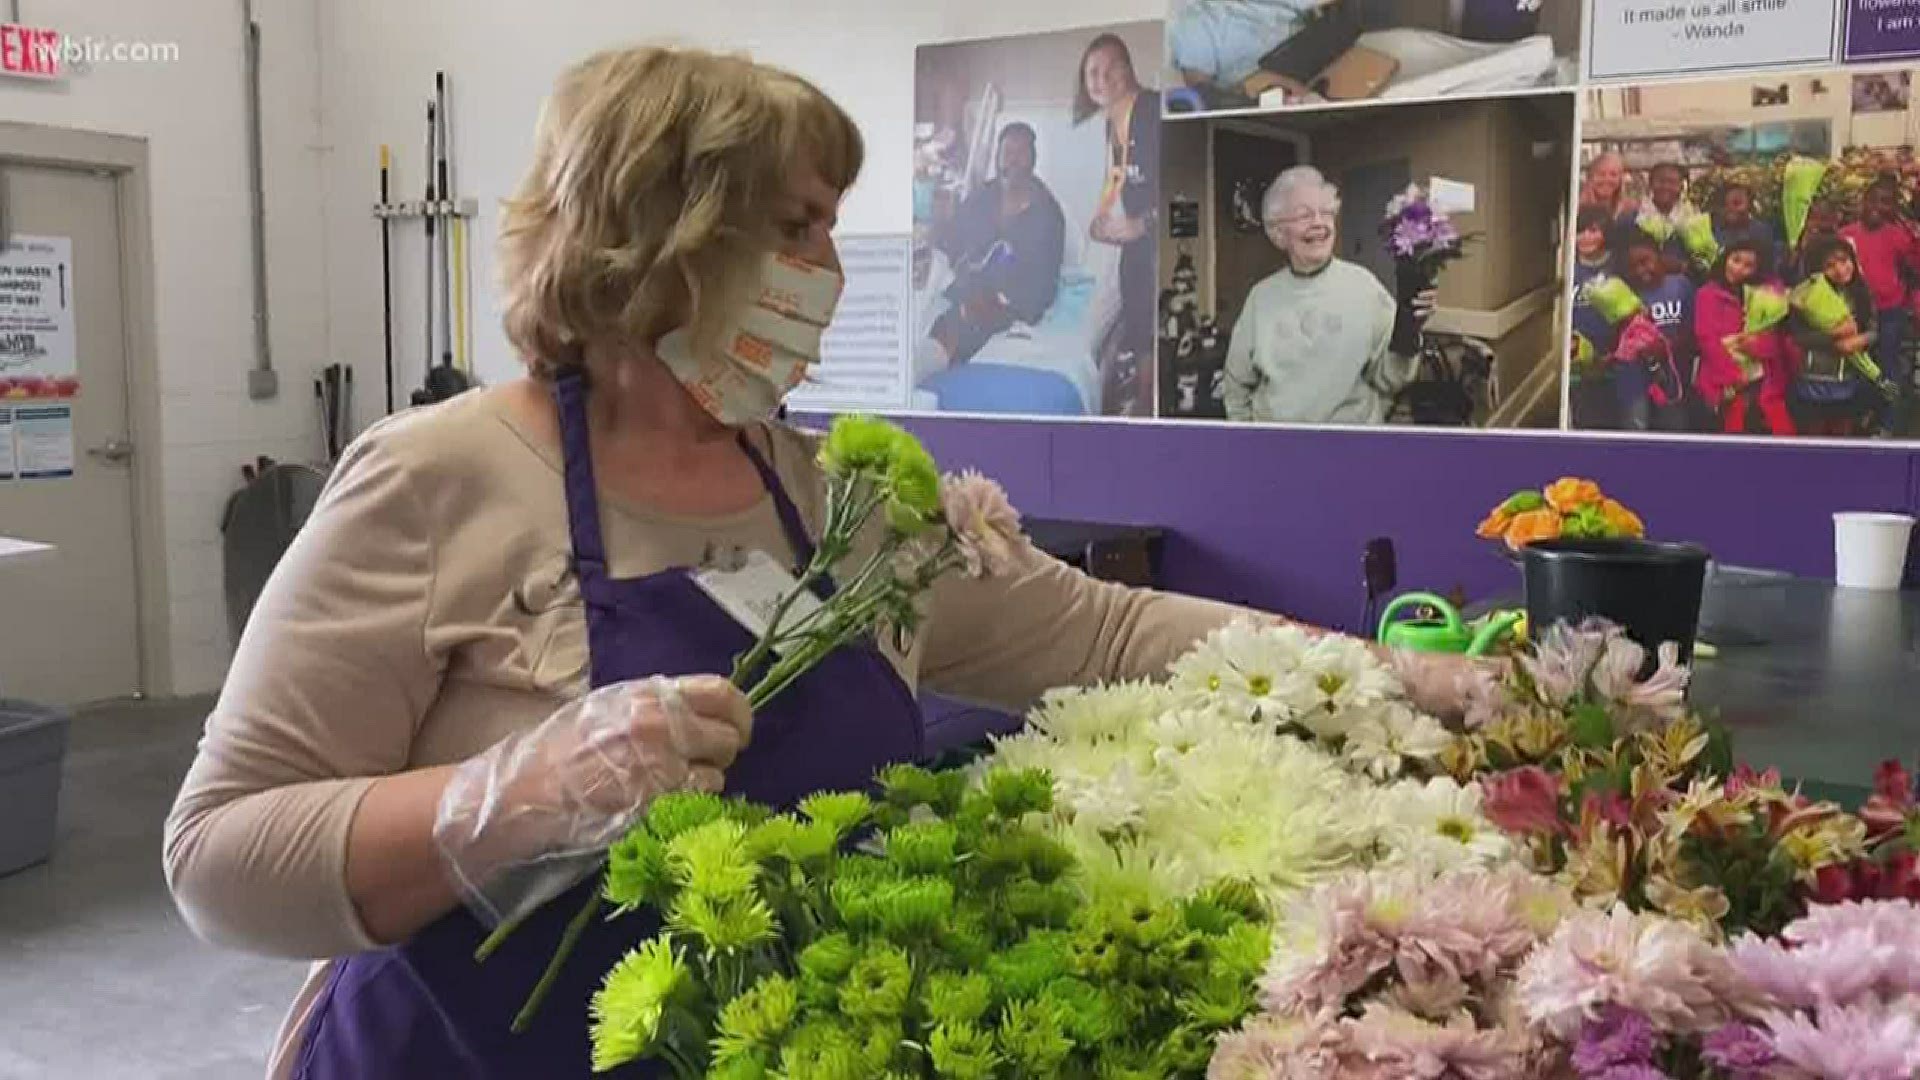 The nonprofit surprises patients with donated bouquets, brightening up hospital rooms -- and lives.